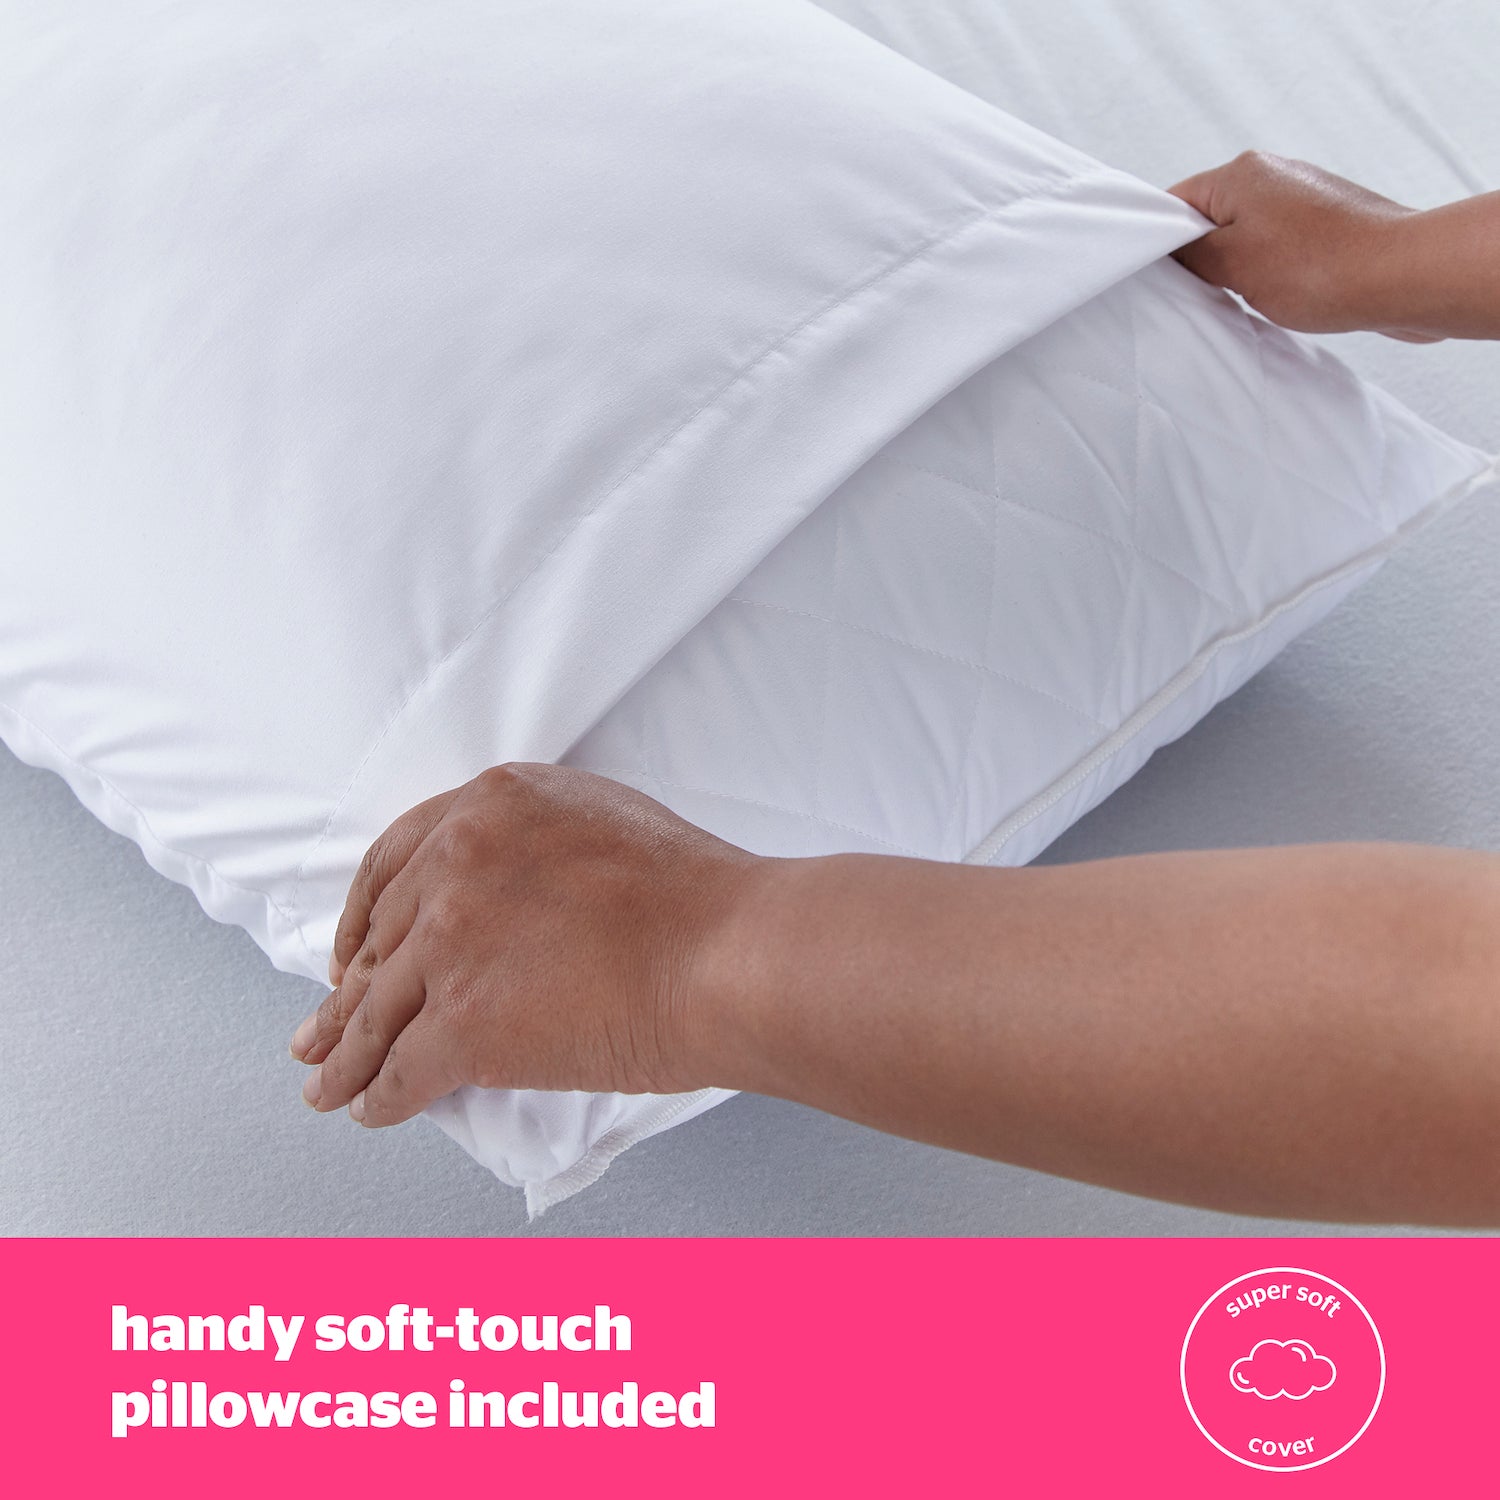 Silentnight Body Support Pillow for Pregnancy and Nursing 